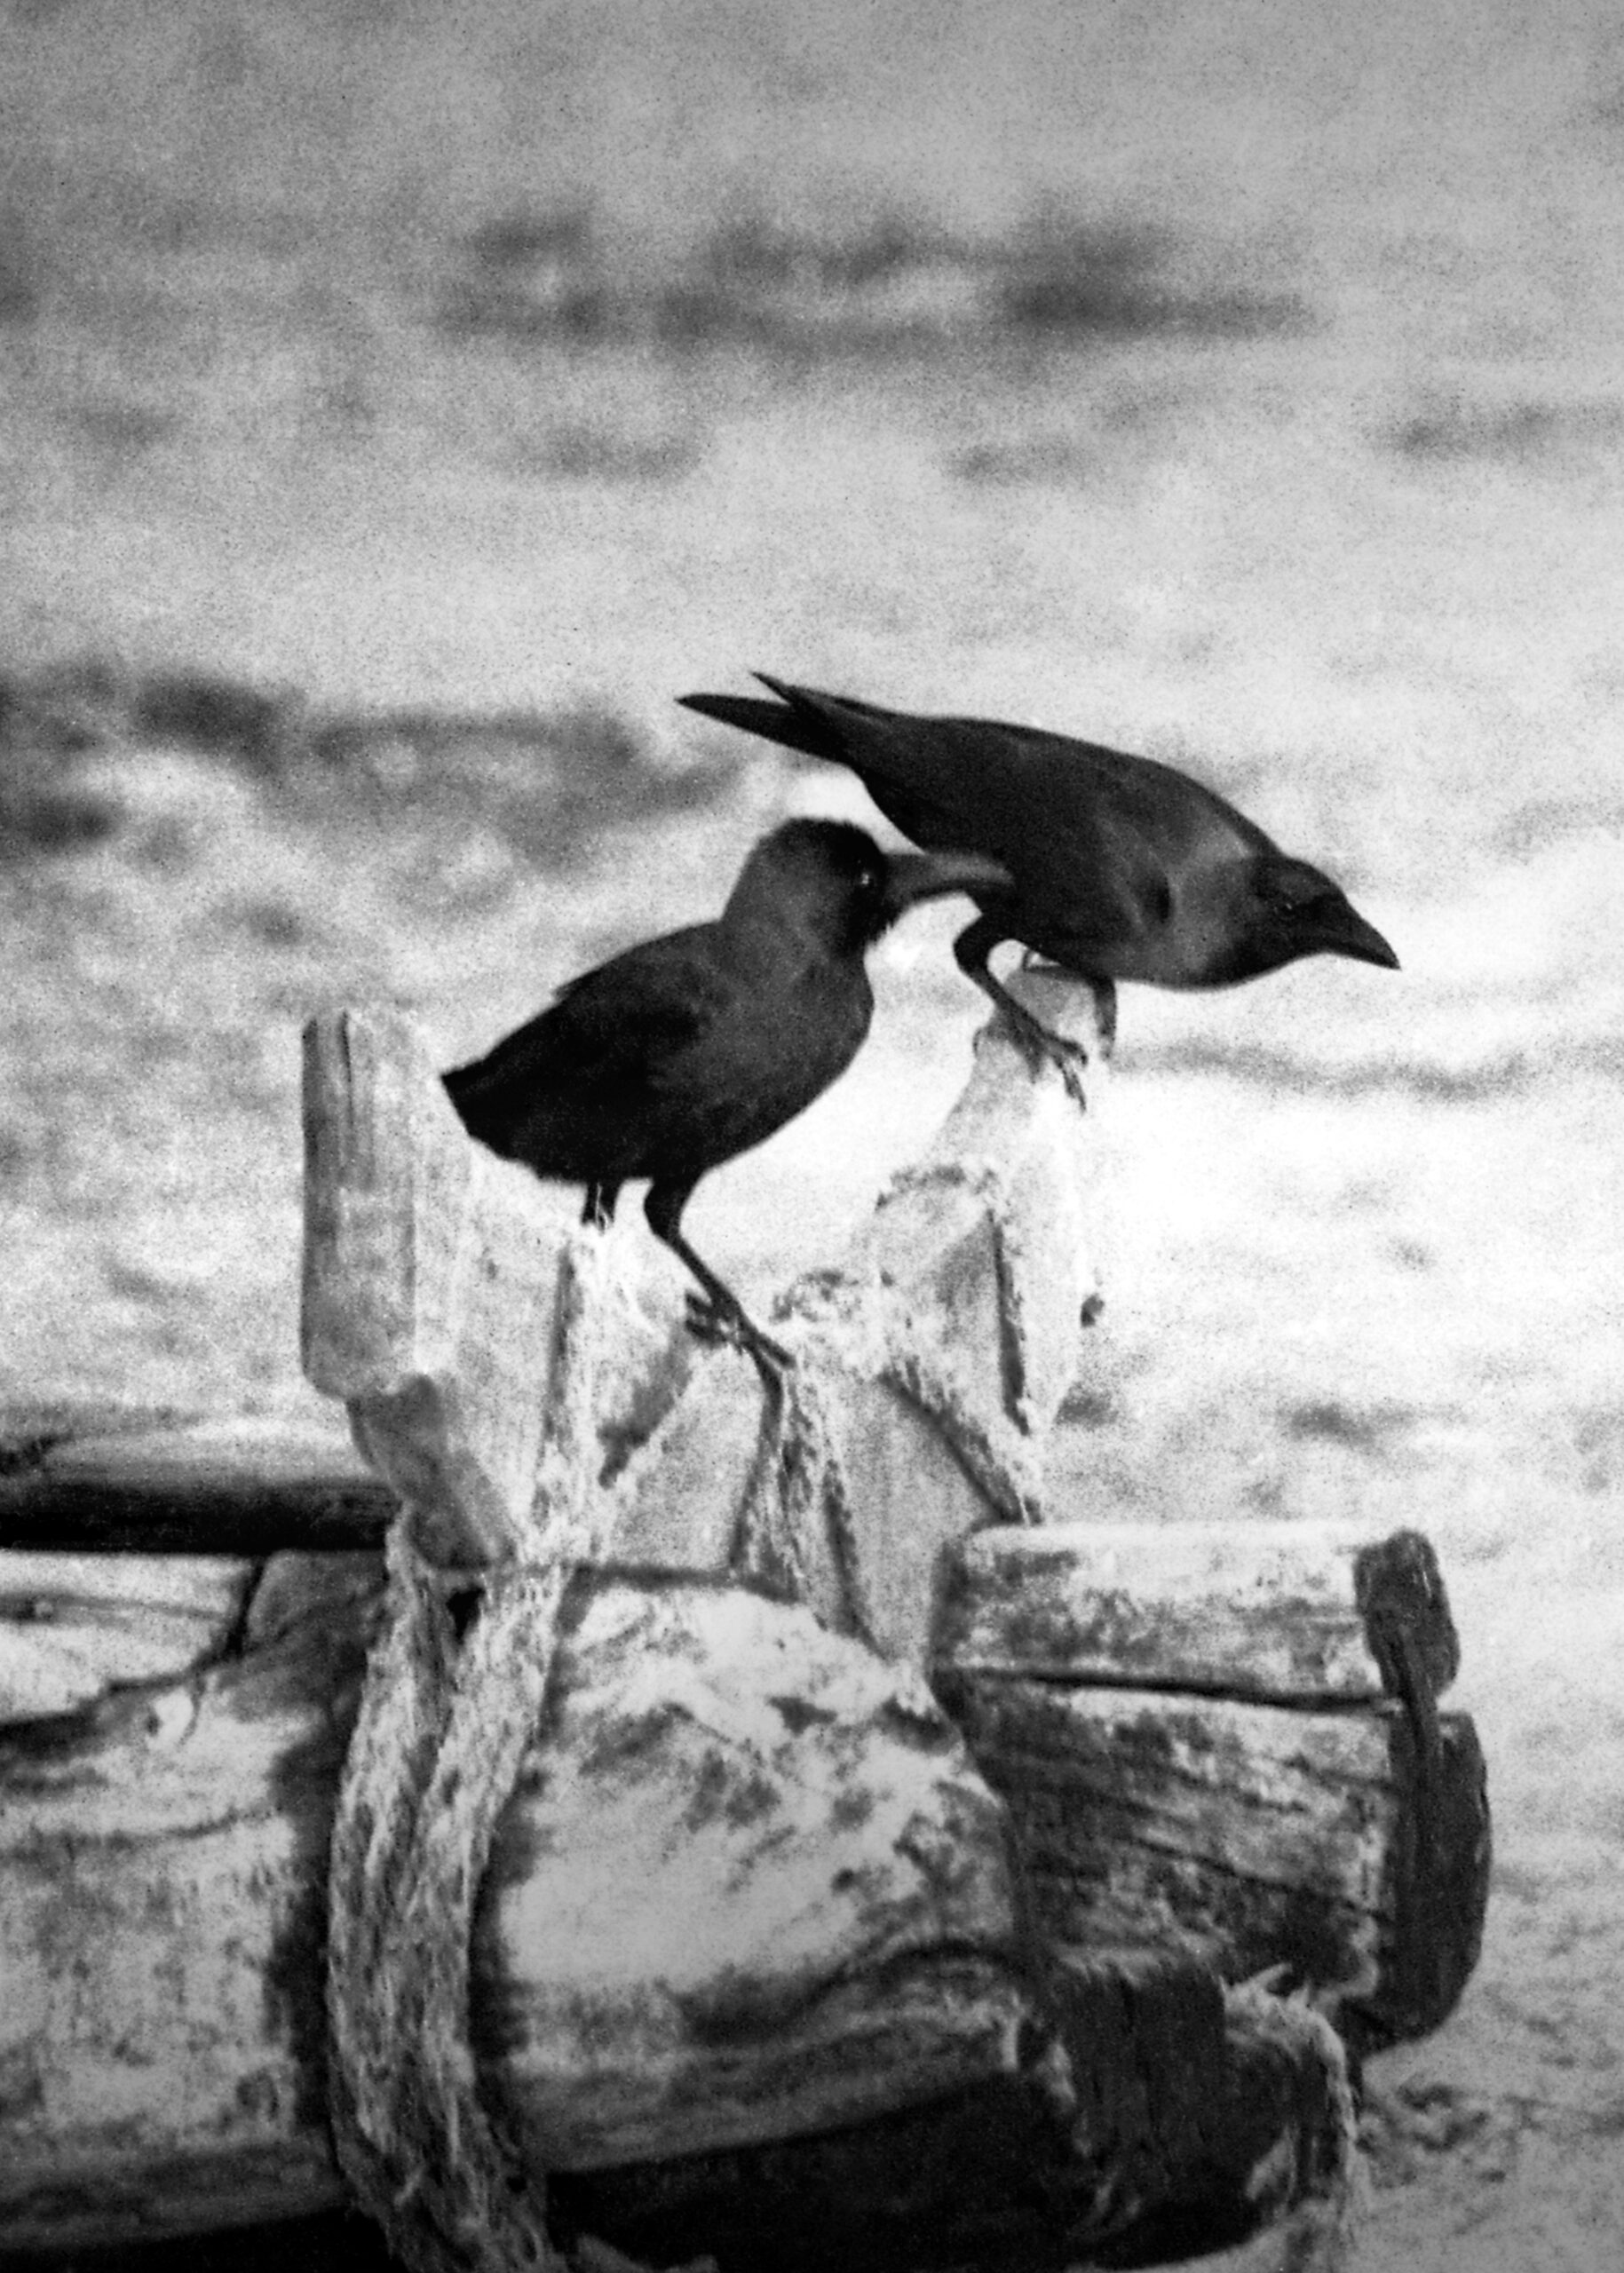 The crows, early photographs of Abul Kalam Azad